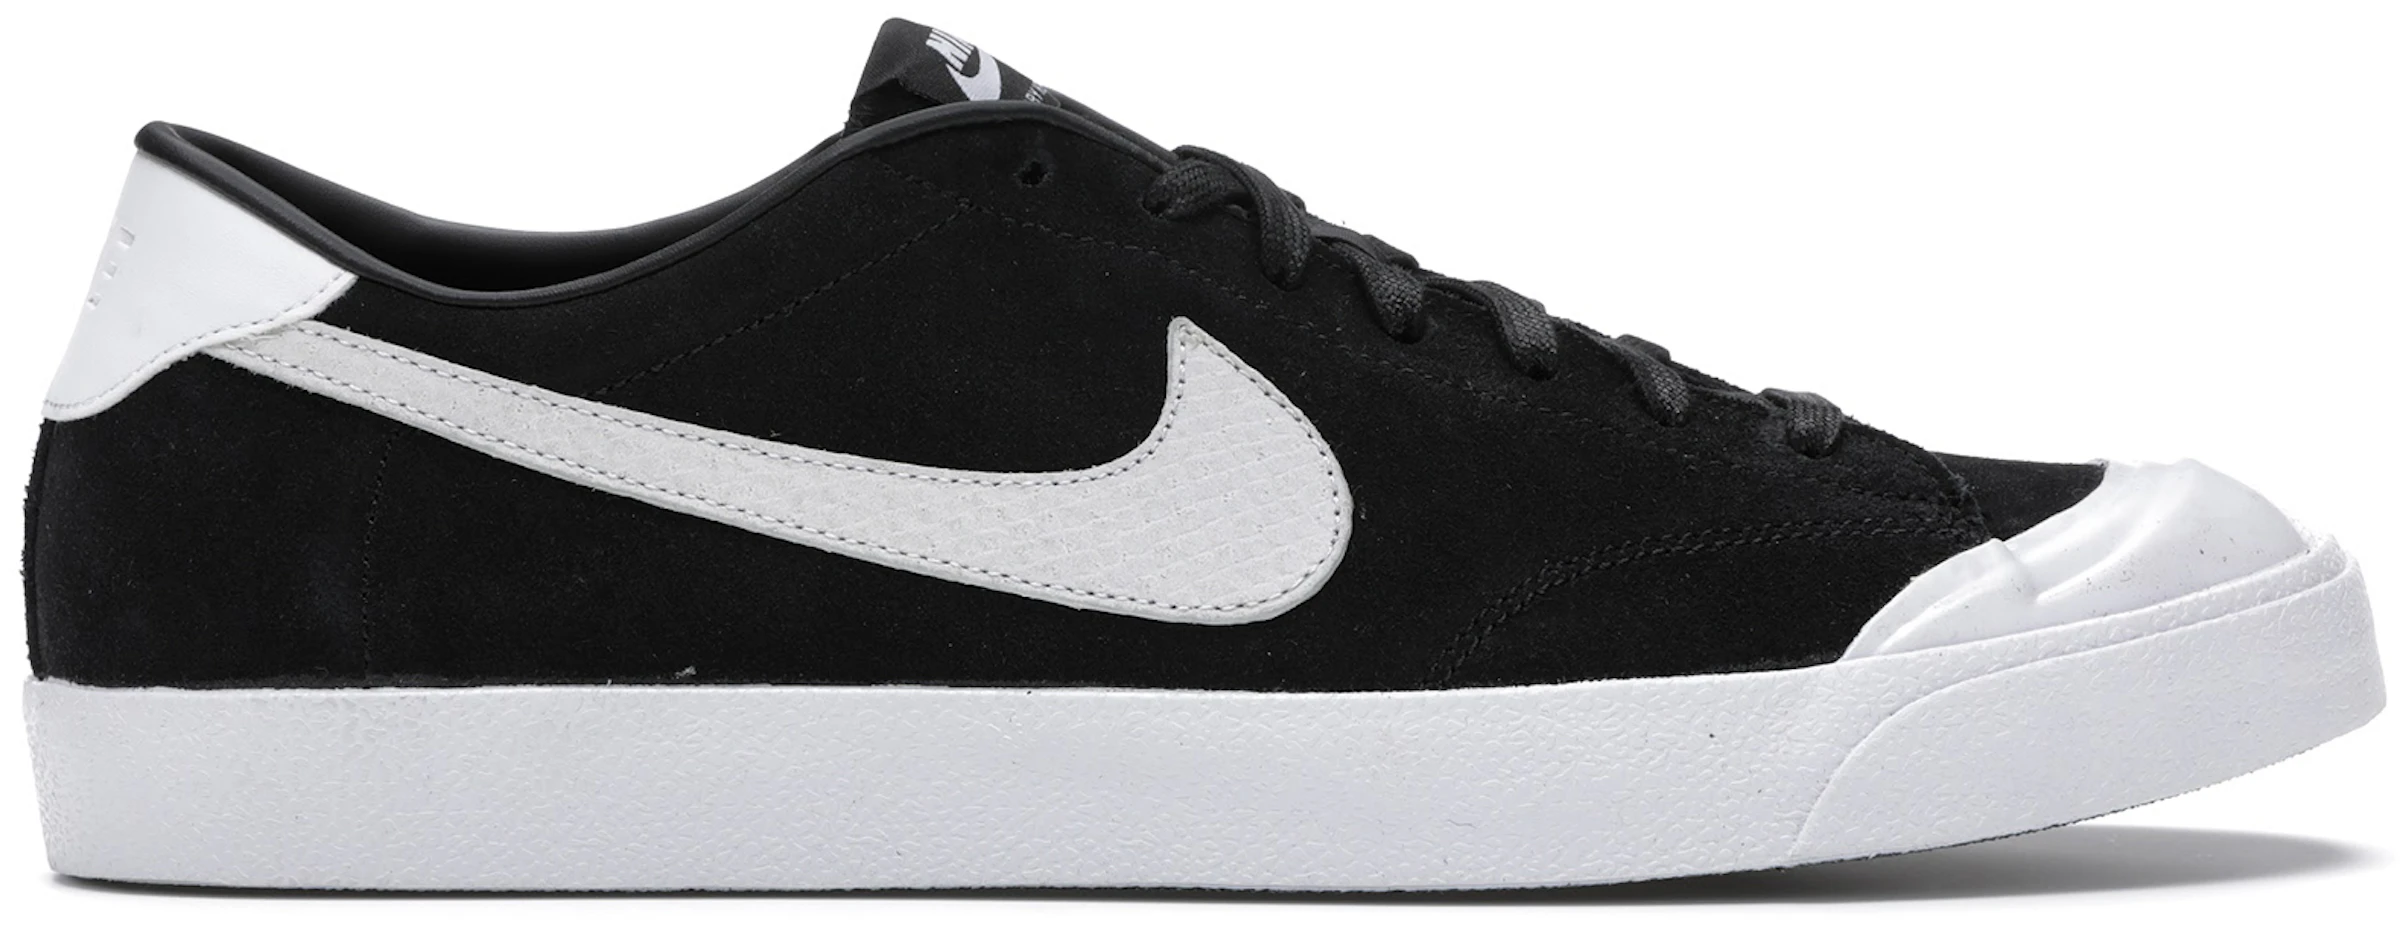 Valkuilen Zus je bent Nike SB Zoom All Court Cory Kennedy - 811252-001 - US